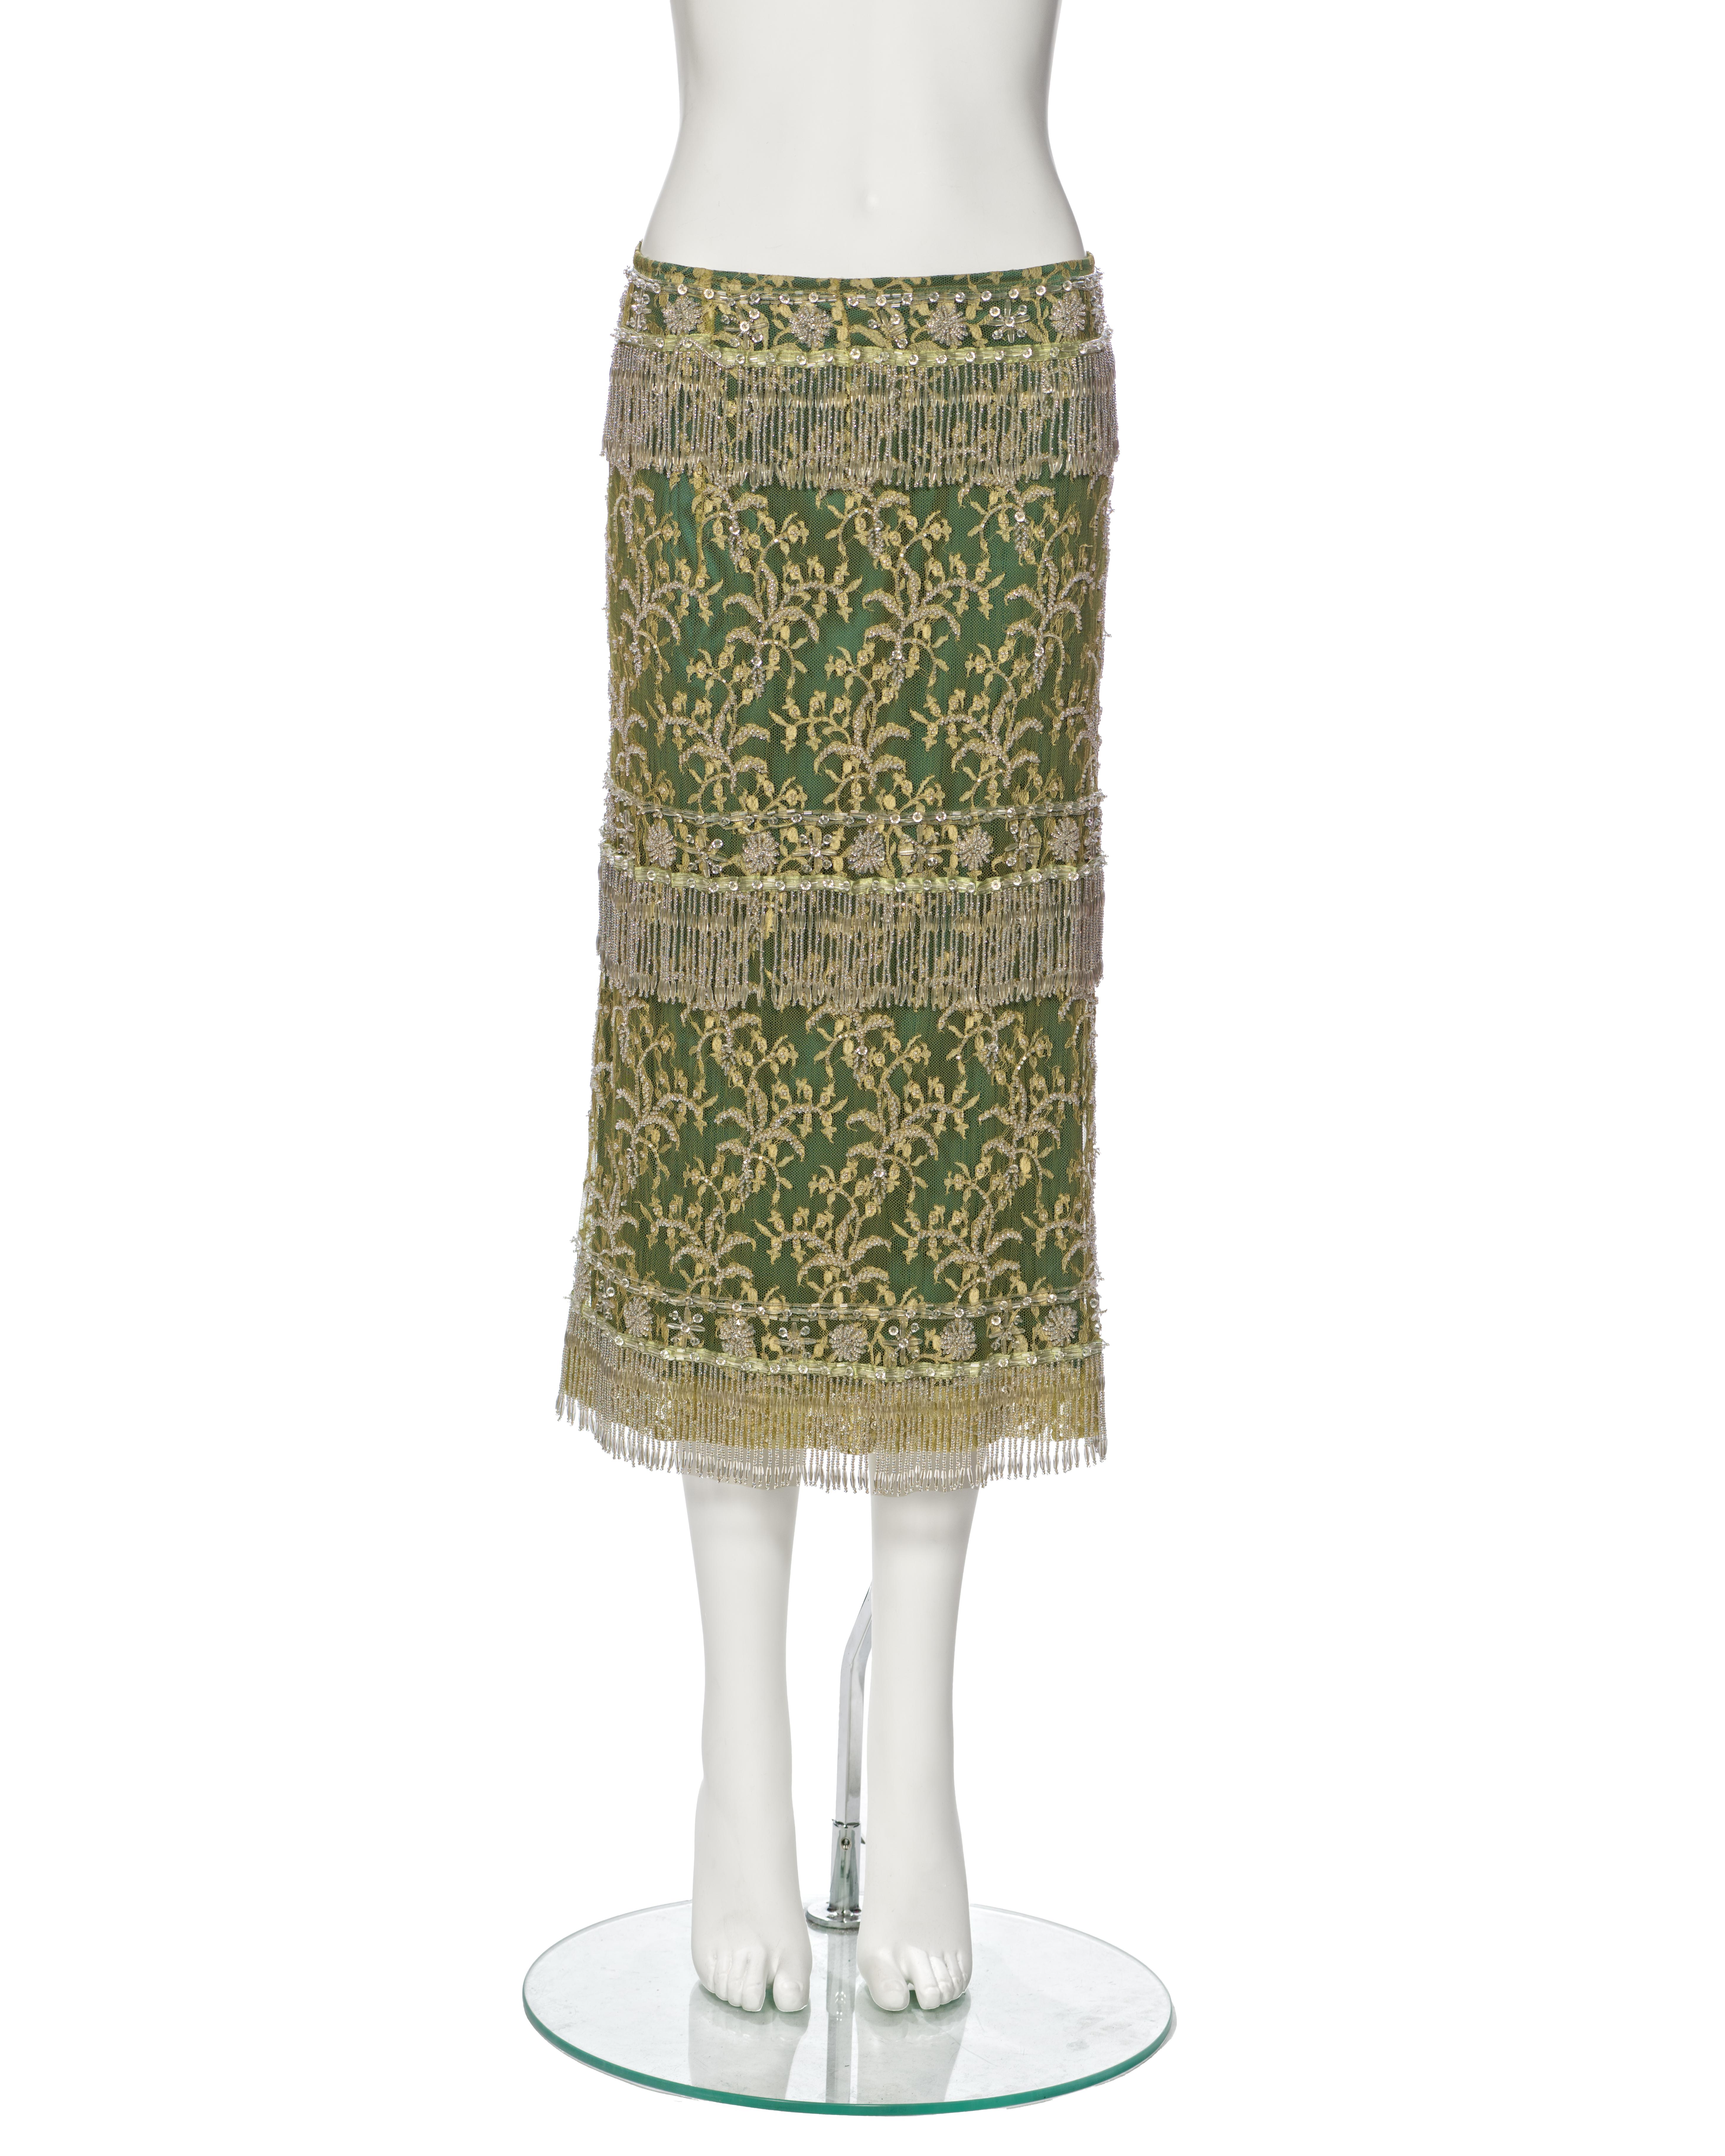 ▪ Rare Dolce & Gabbana Beaded Lace Evening Skirt
▪ Spring-Summer 2000
▪ Expertly crafted from chartreuse lace, meticulously embellished with clear beads
▪ Adorned with tiered clear beaded tassel trim
▪ Lined with luxurious green silk
▪ Cut to an